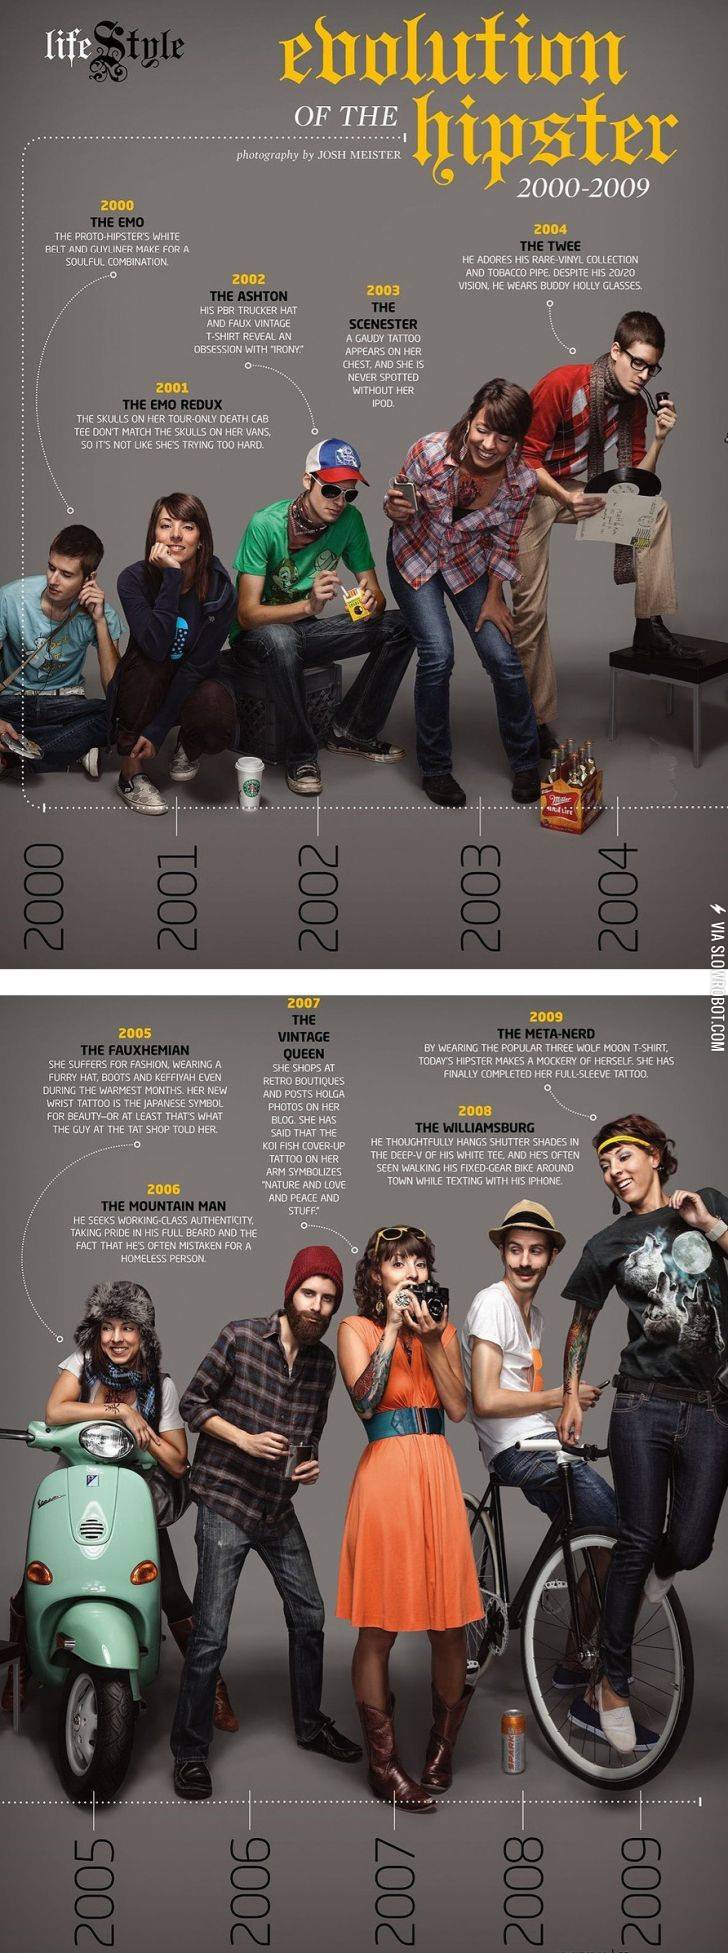 tHE+EVOLUTION+OF+THE+HIPSTER